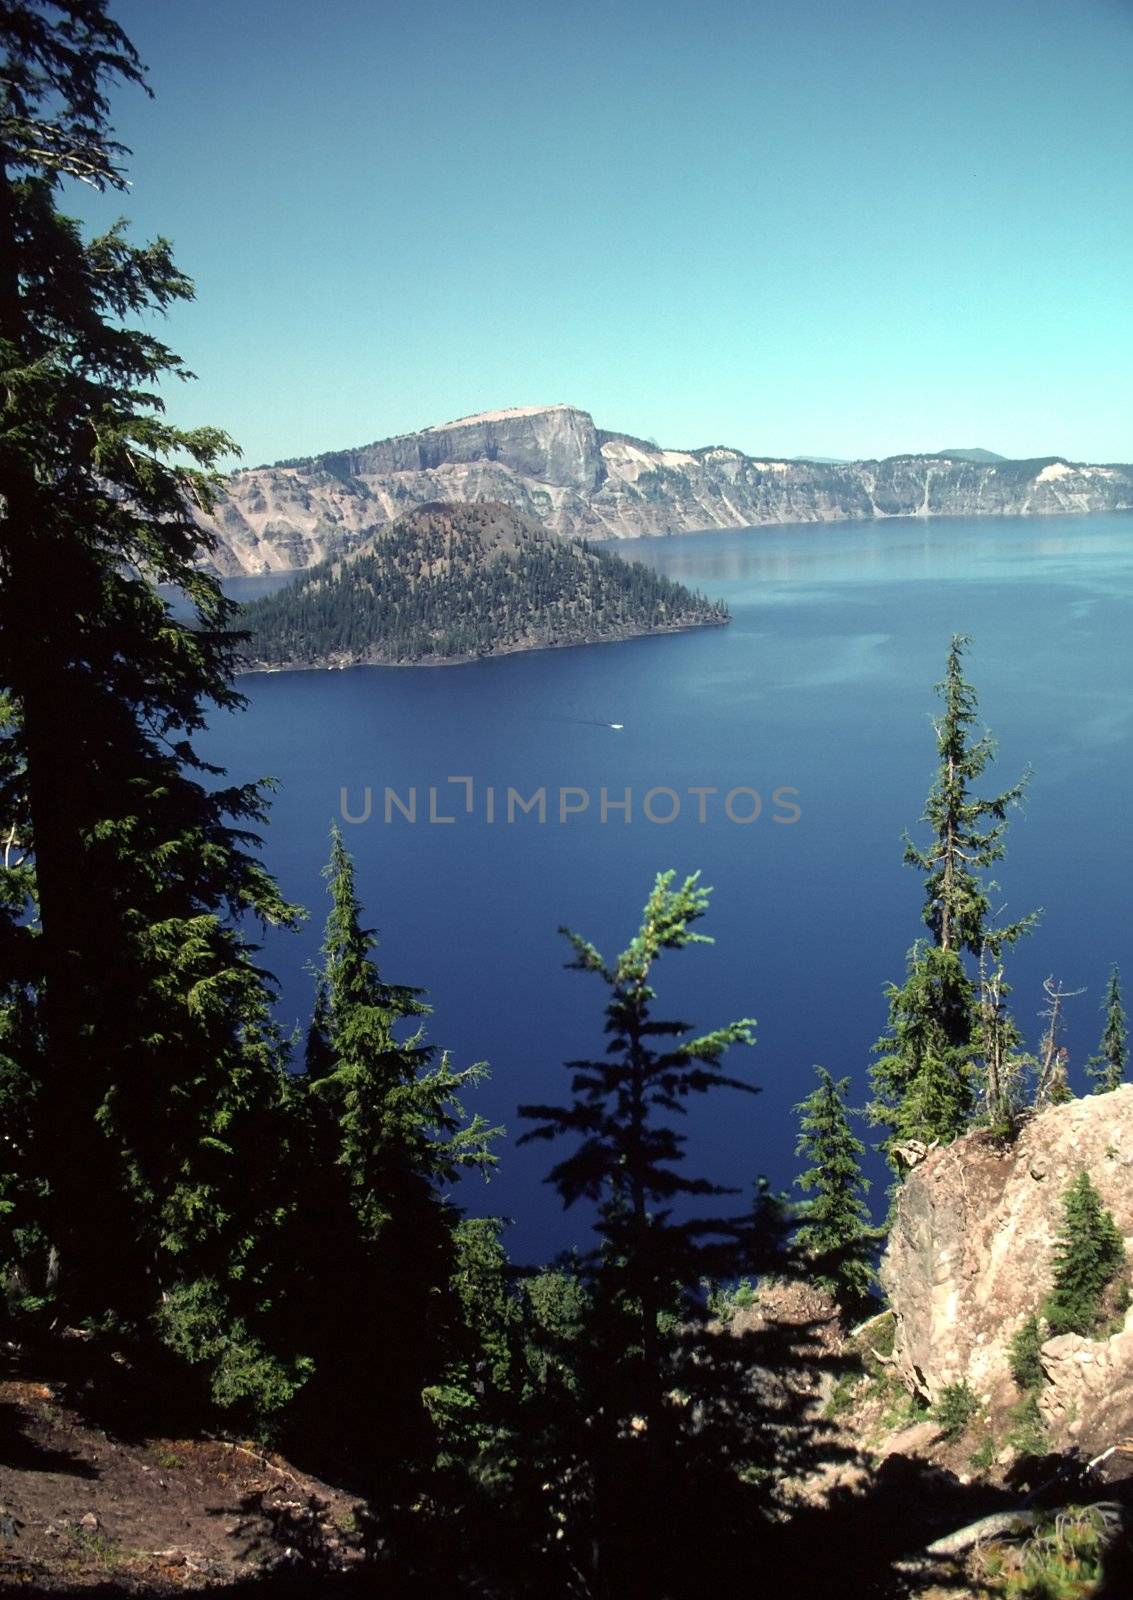 Crater Lake National Park is a United States National Park located in Southern Oregon